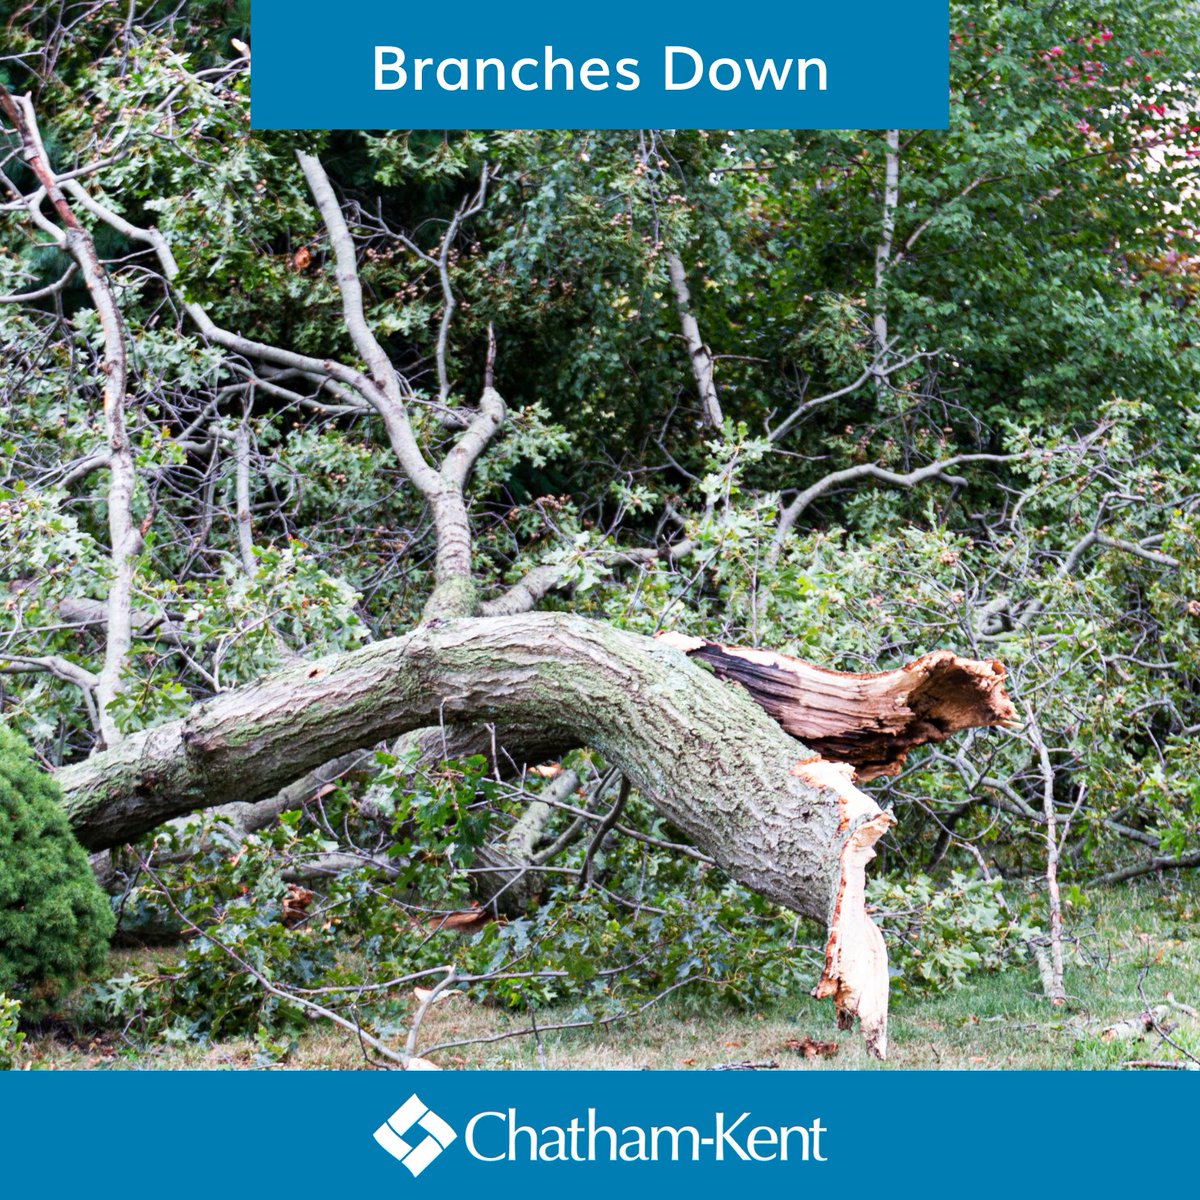 ‼️There are quite a few branches down at municipal parks across Chatham-Kent. Low-hanging branches may also be an issue. Crews are working diligently to assess and deal with significant safety issues first. 👉 If you see a potential hazard, call 3-1-1 or 519-360-1998. #ckont